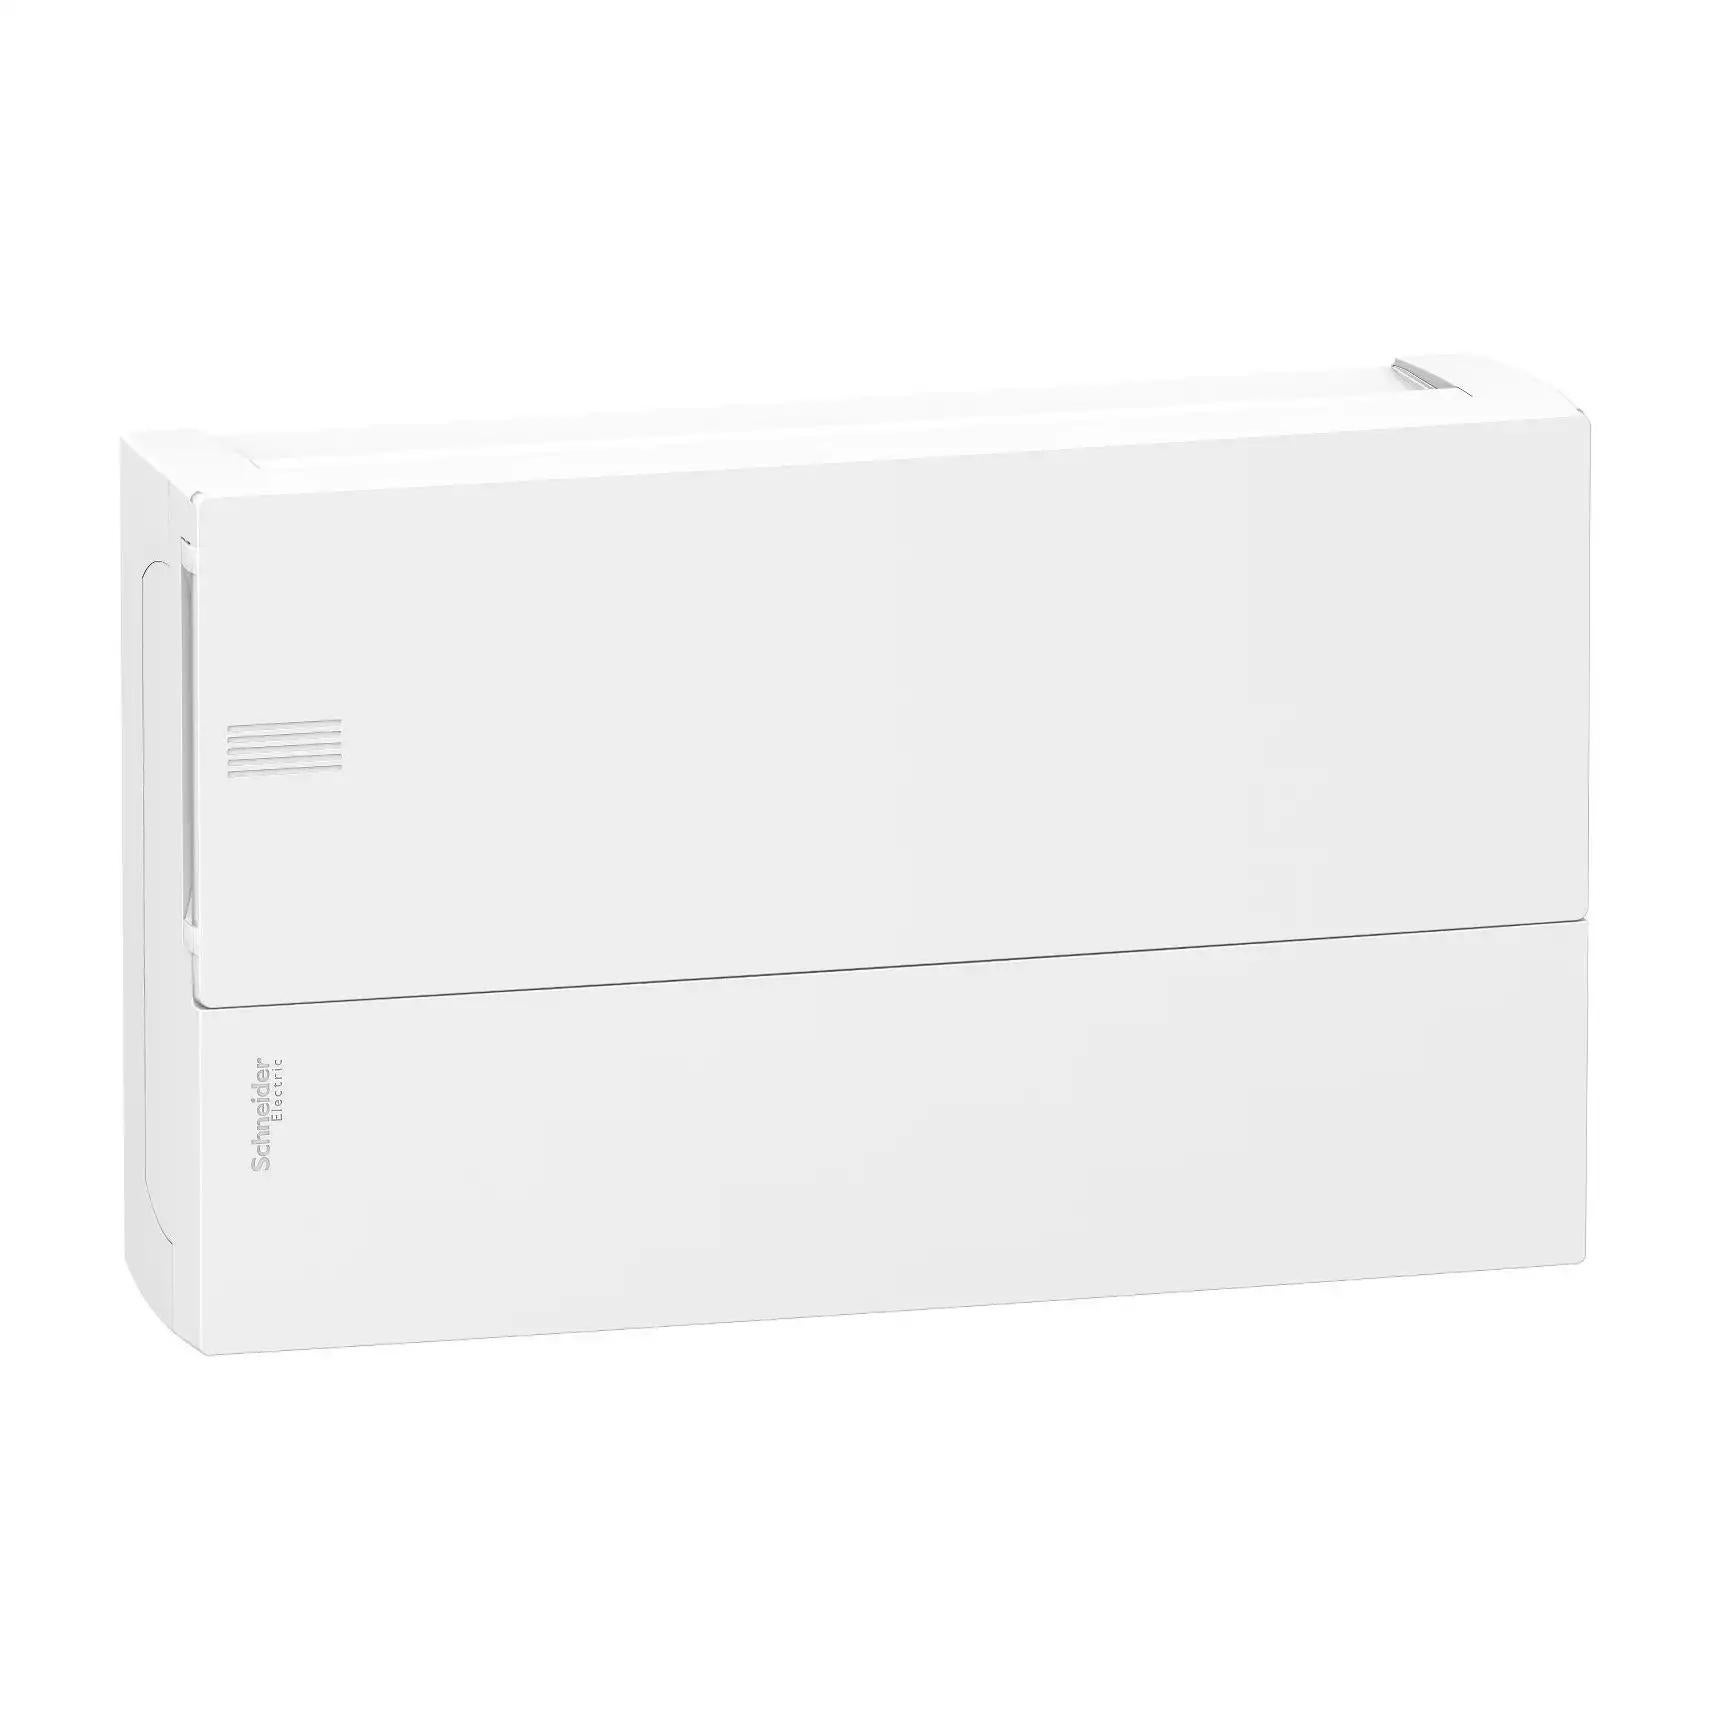 Enclosure, Resi9 MP, surface mounting, 1 row of 18 modules, IP40, white door, 1 earth + 1 neutral terminal blocks